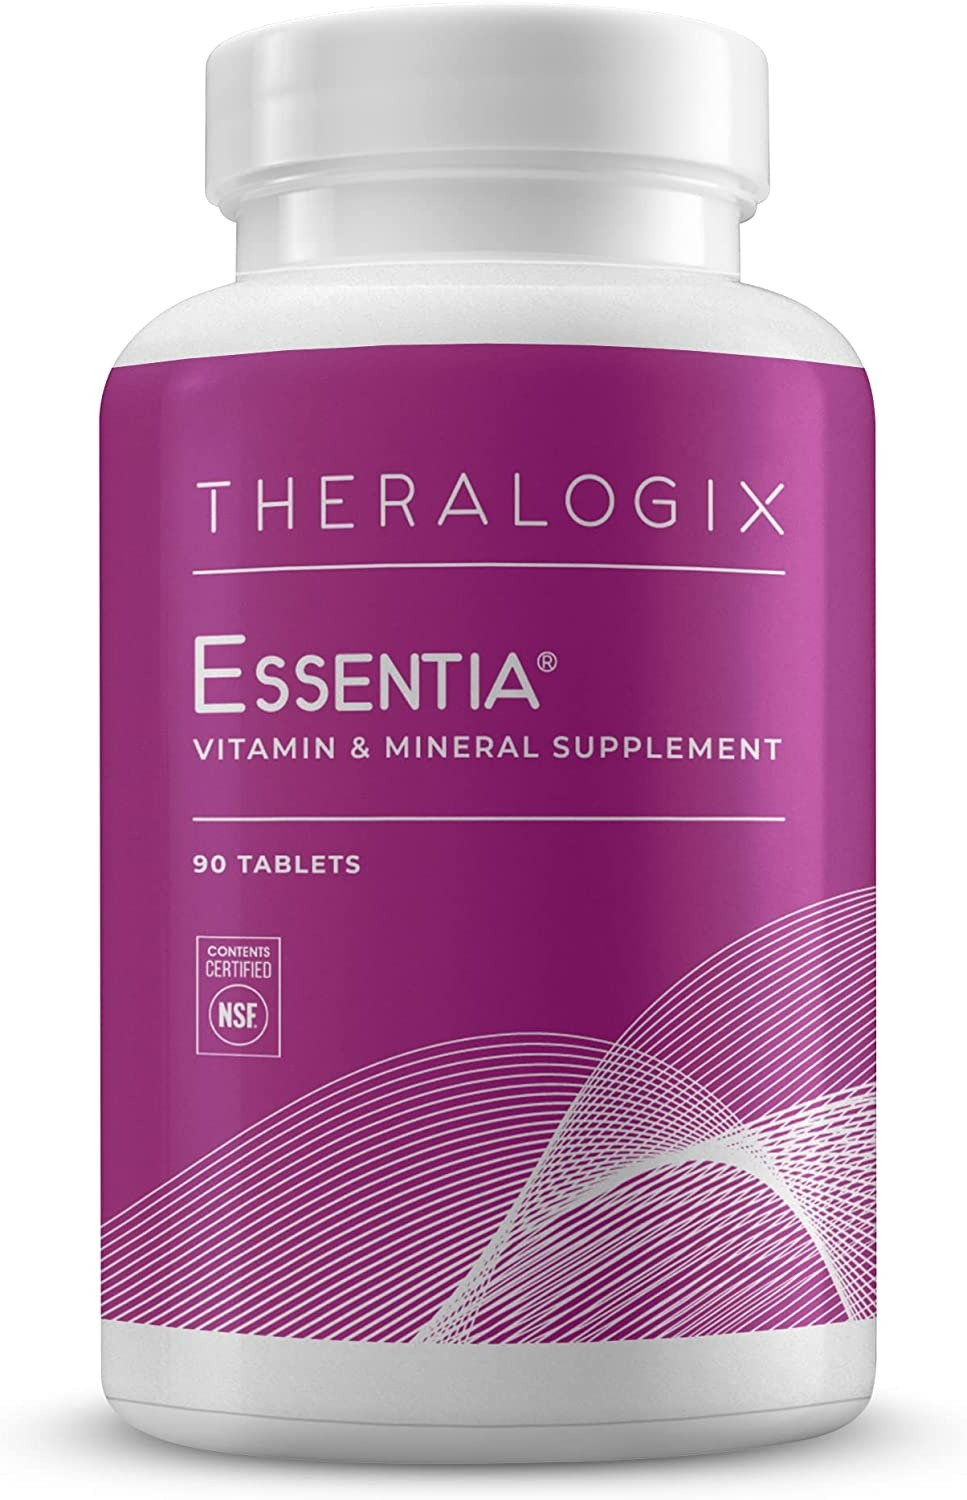 Theralogix Essentia Daily Multivitamin for Women with Iron - 90 Adet-0